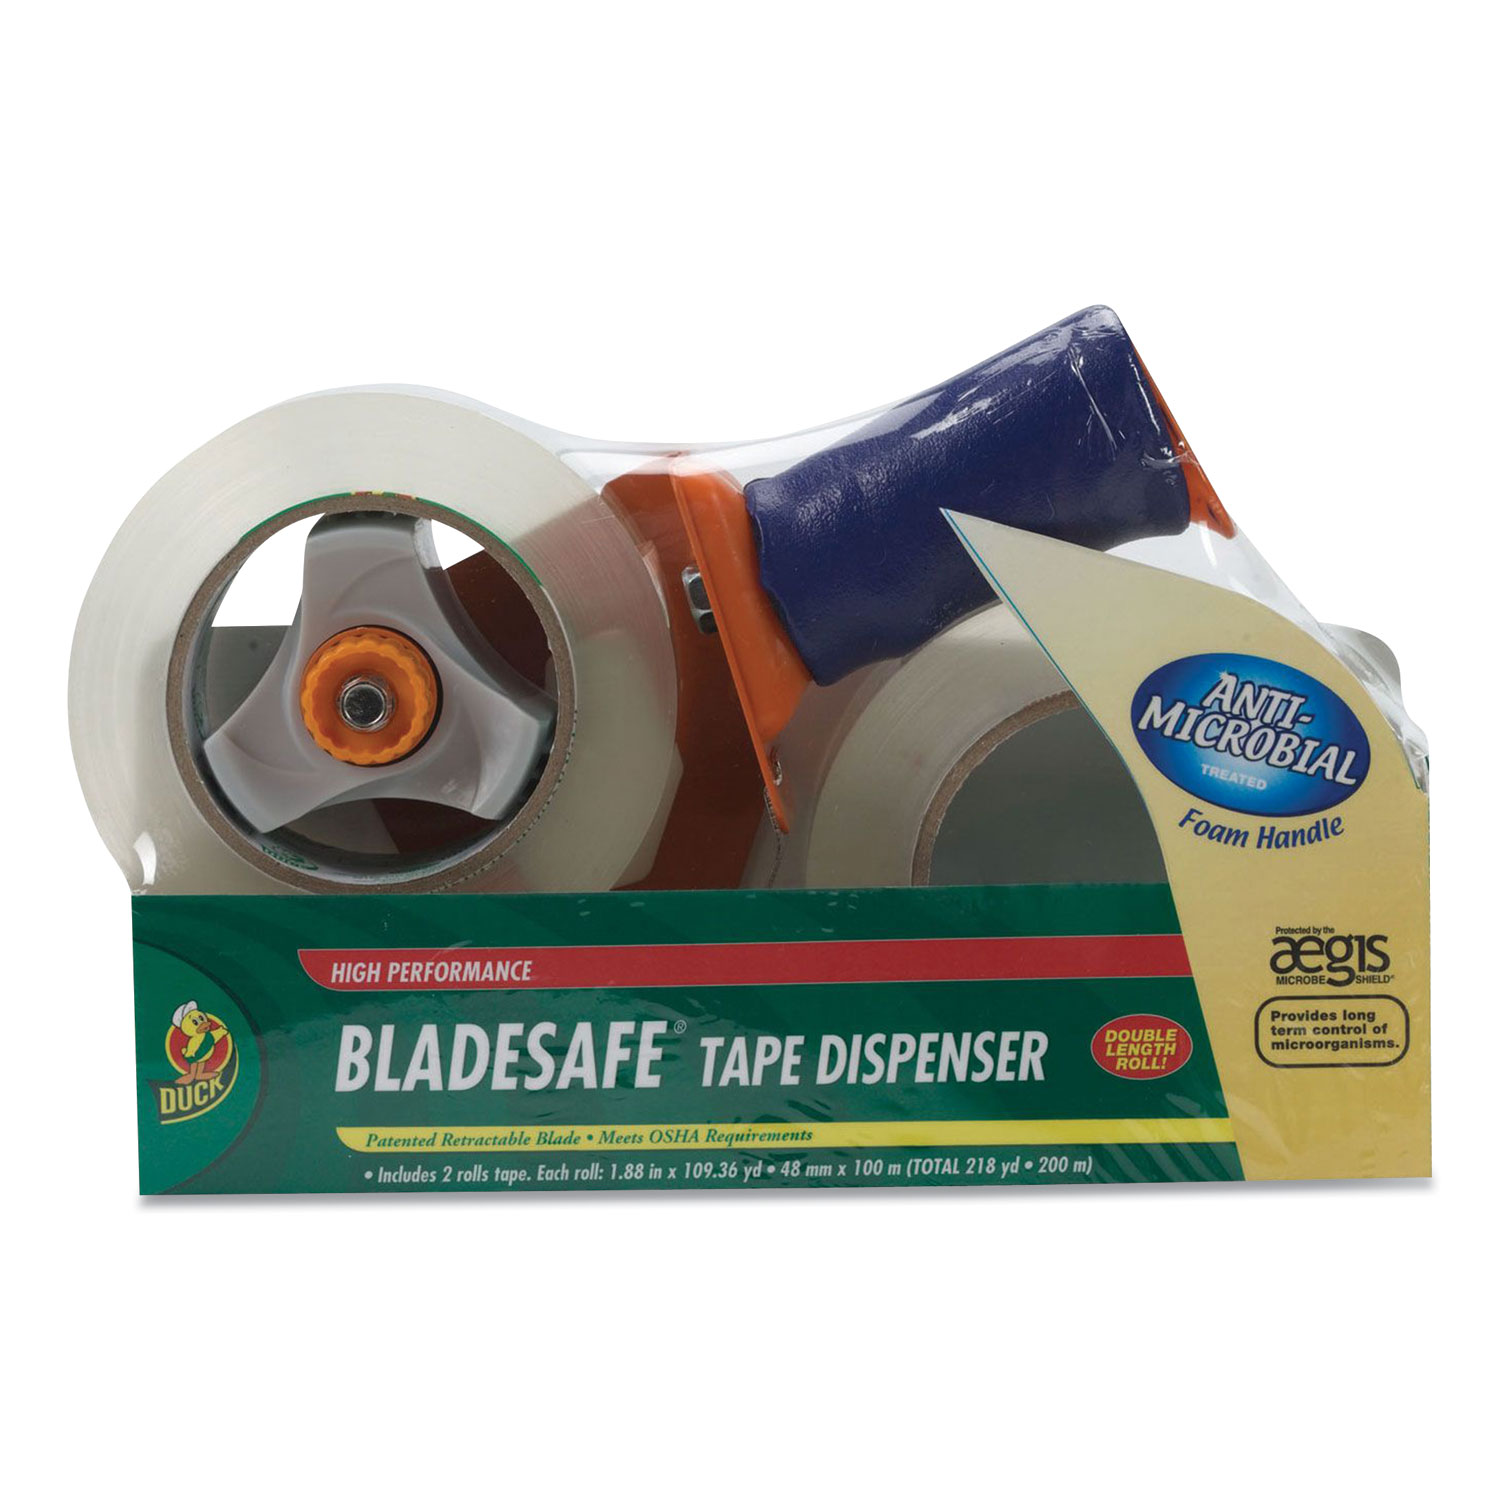 Duck® HP260 Packaging Tape with Bladesafe Pistol-Grip Dispenser, 3 Core, 1.88 x 109.36 yds, Clear, 2/Pack